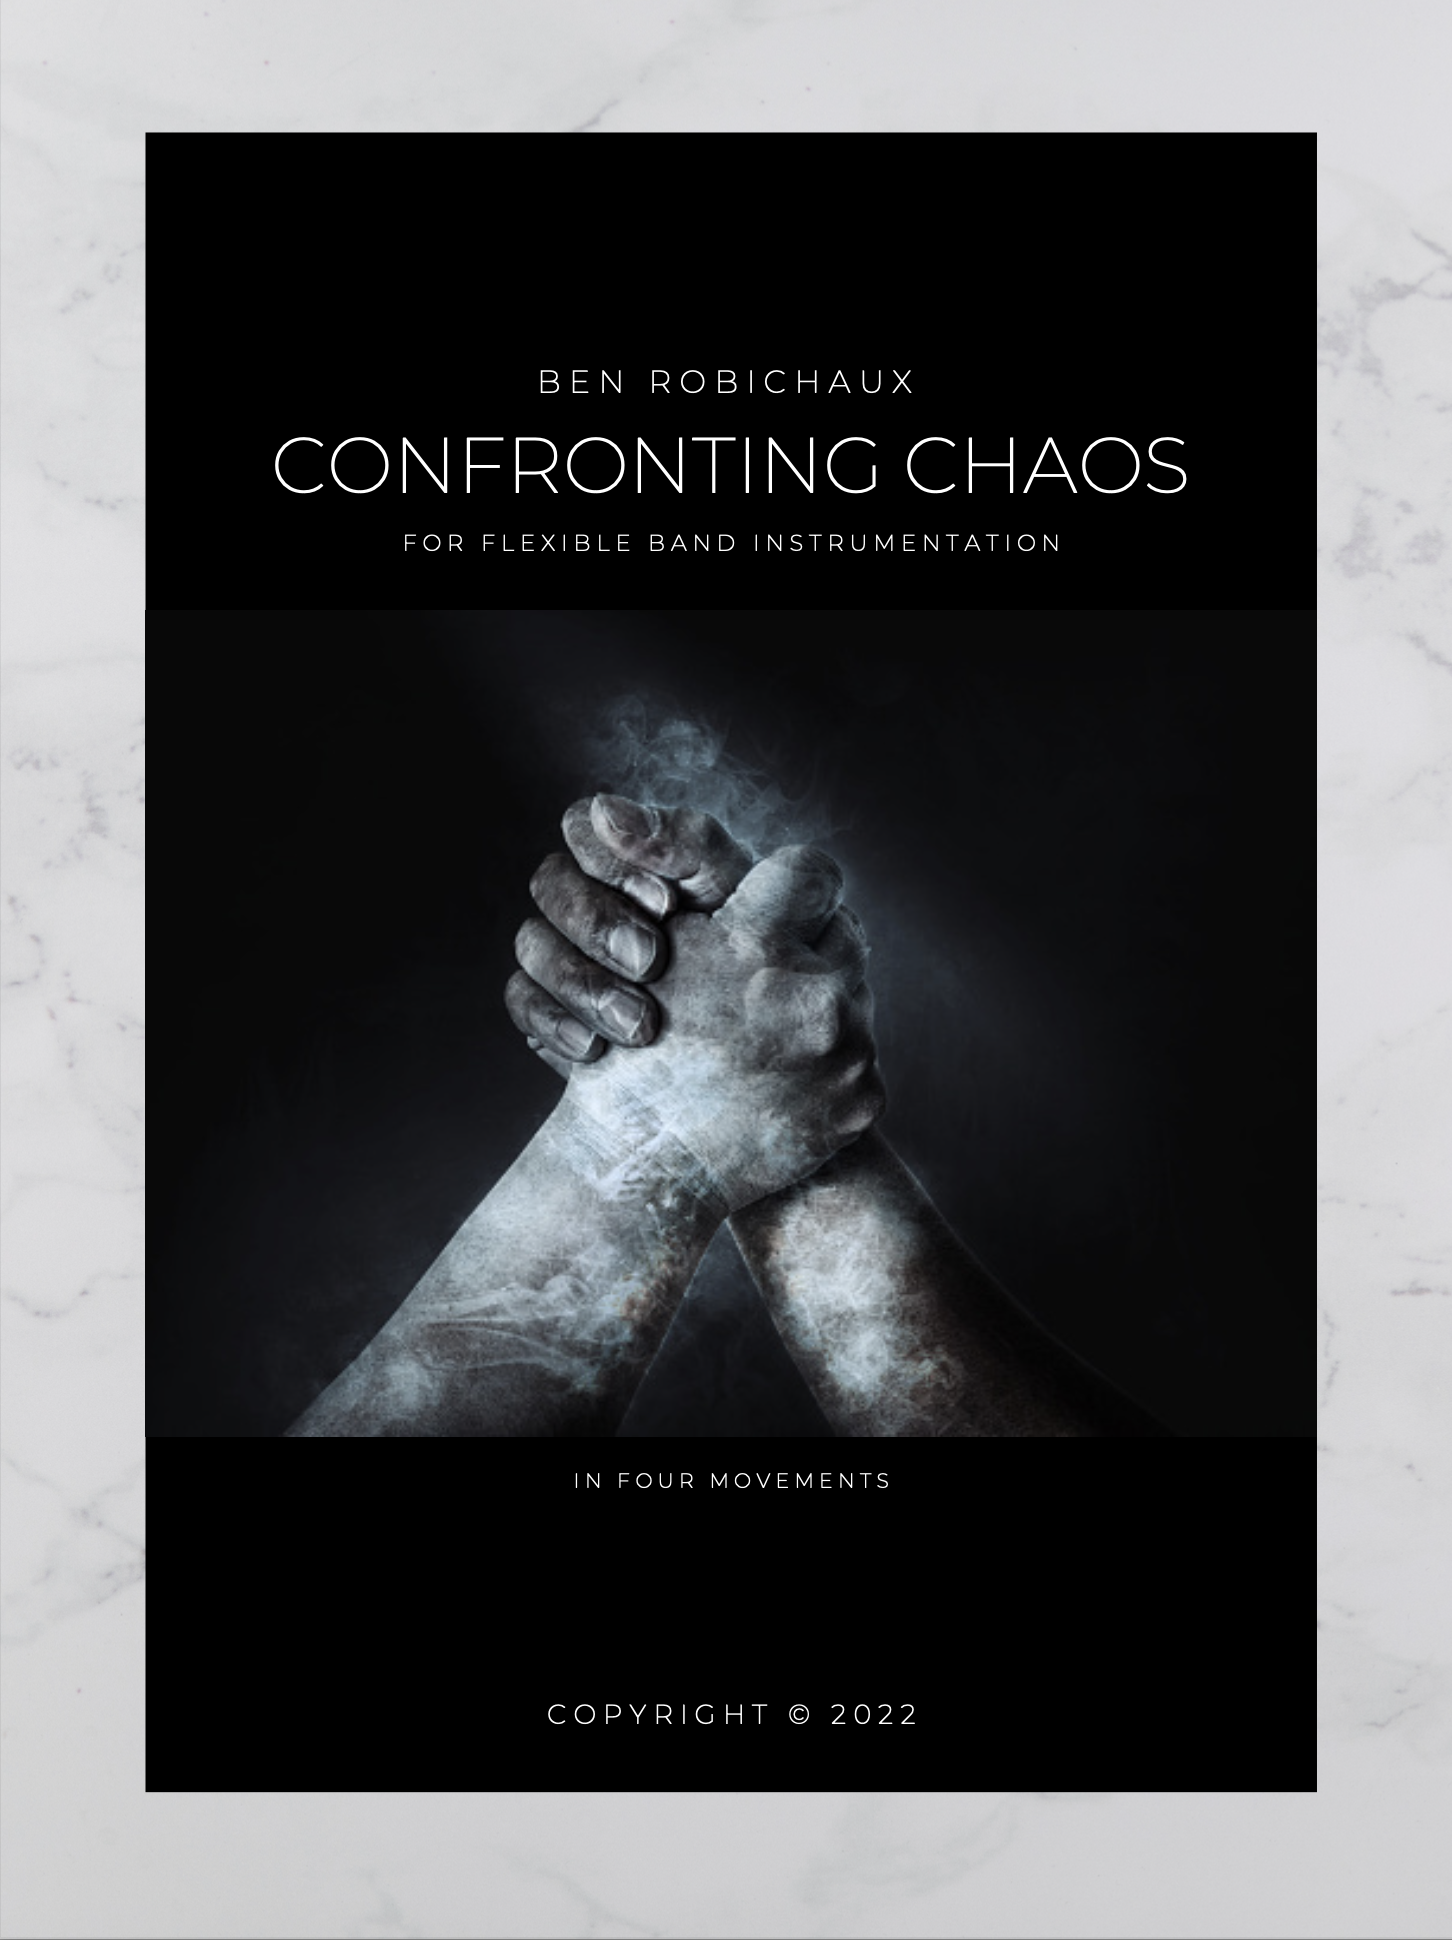 Confronting Chaos by Ben Robichaux